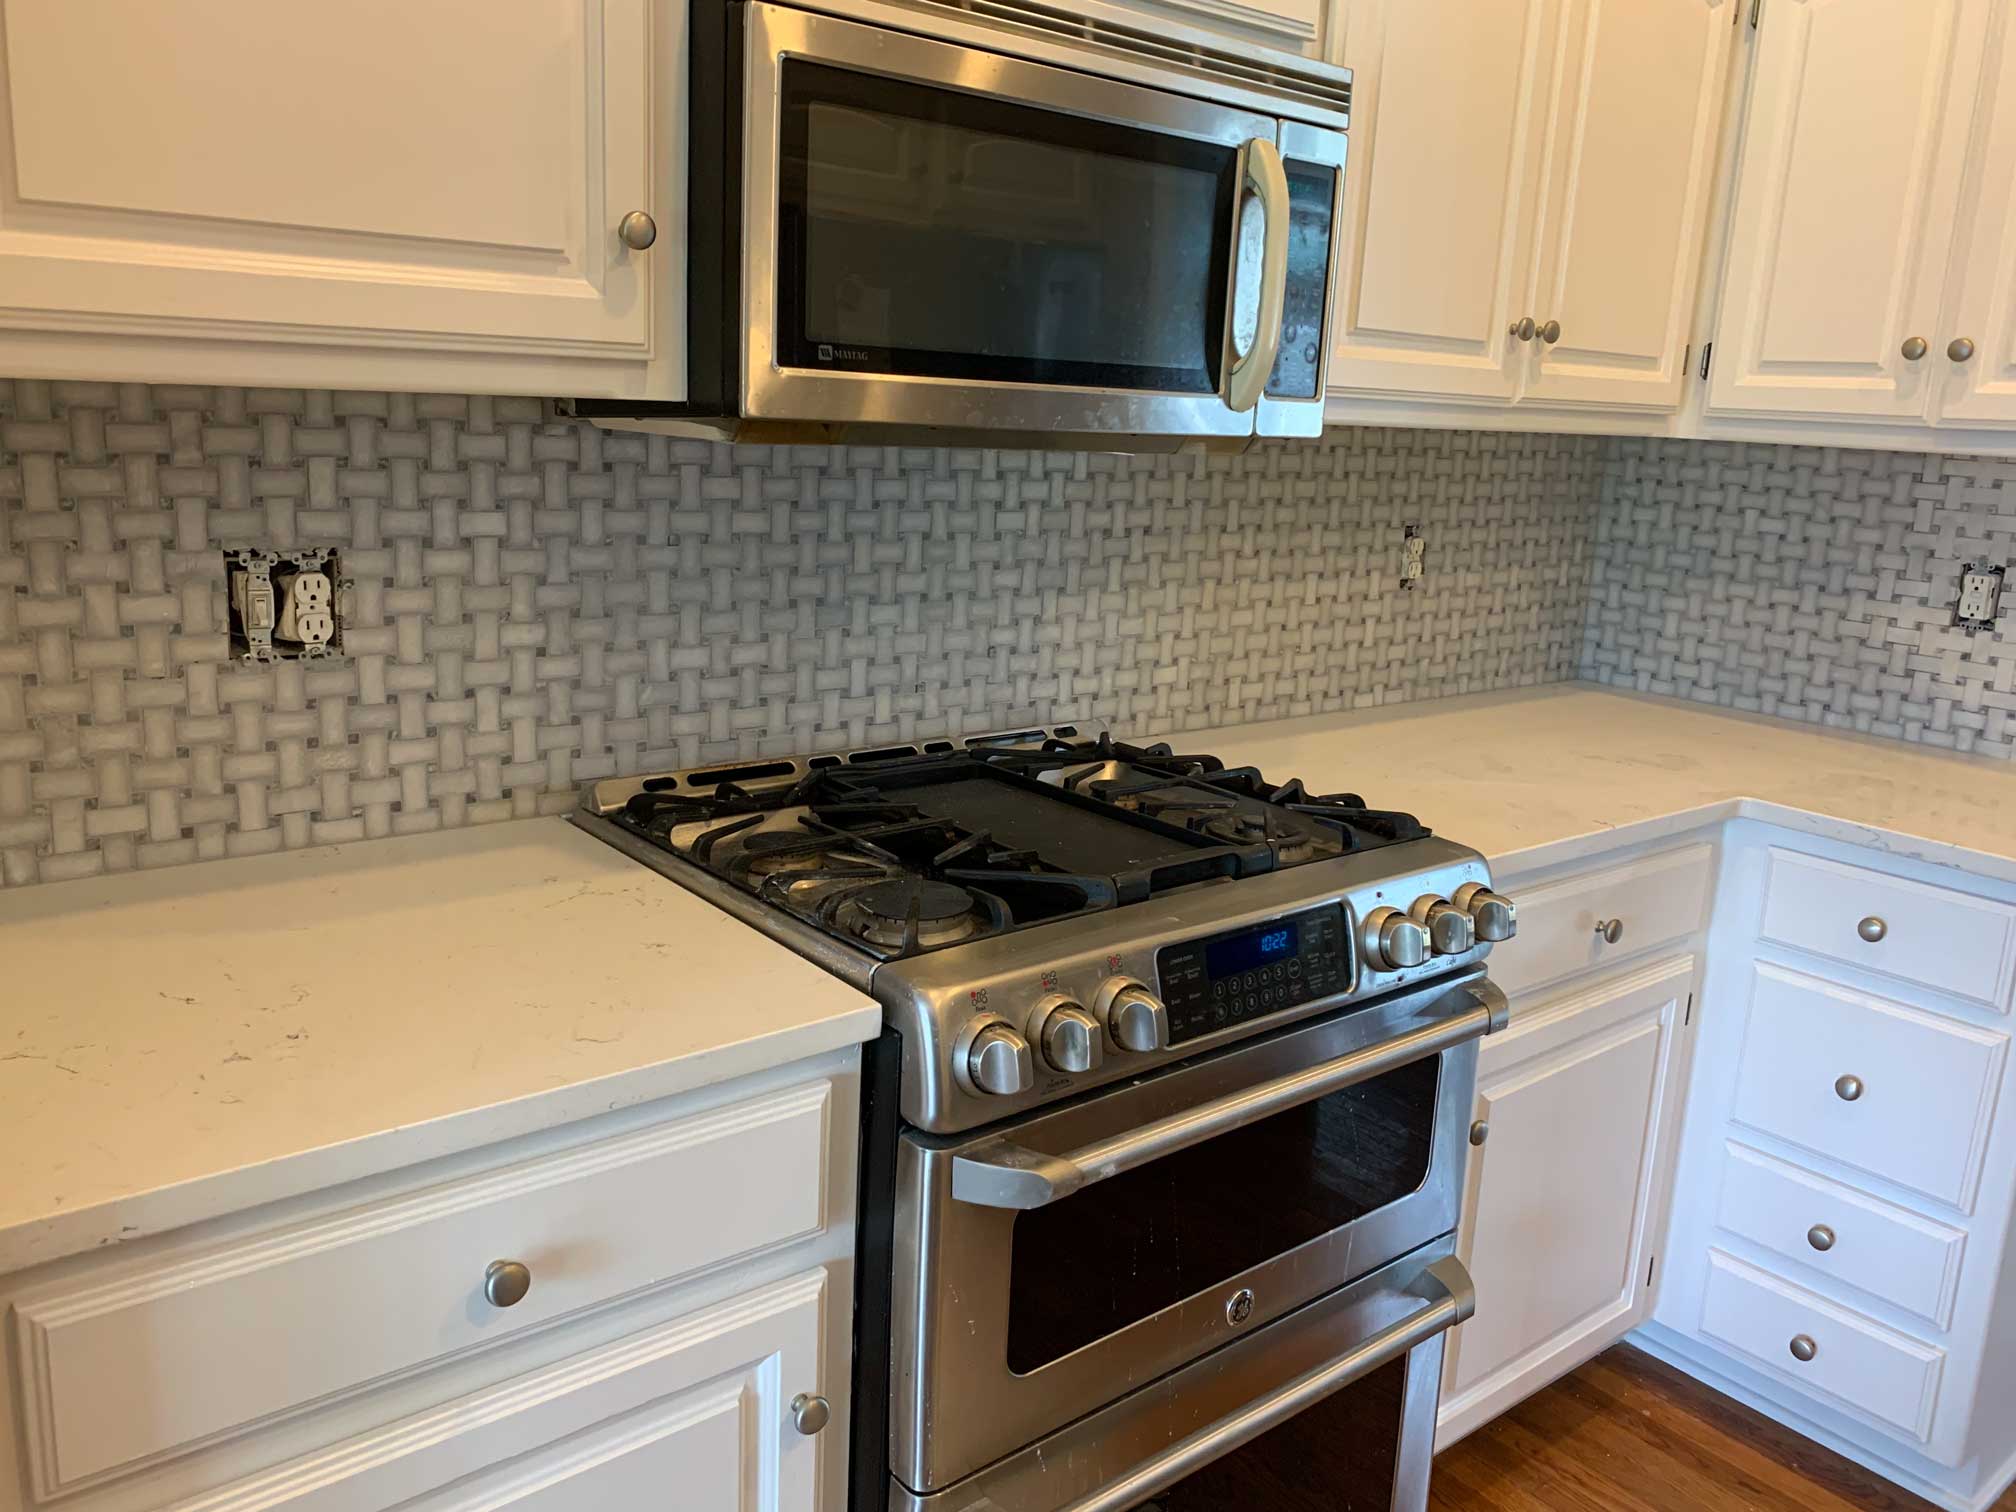 Kitchen remodel with custom backsplash and countertop